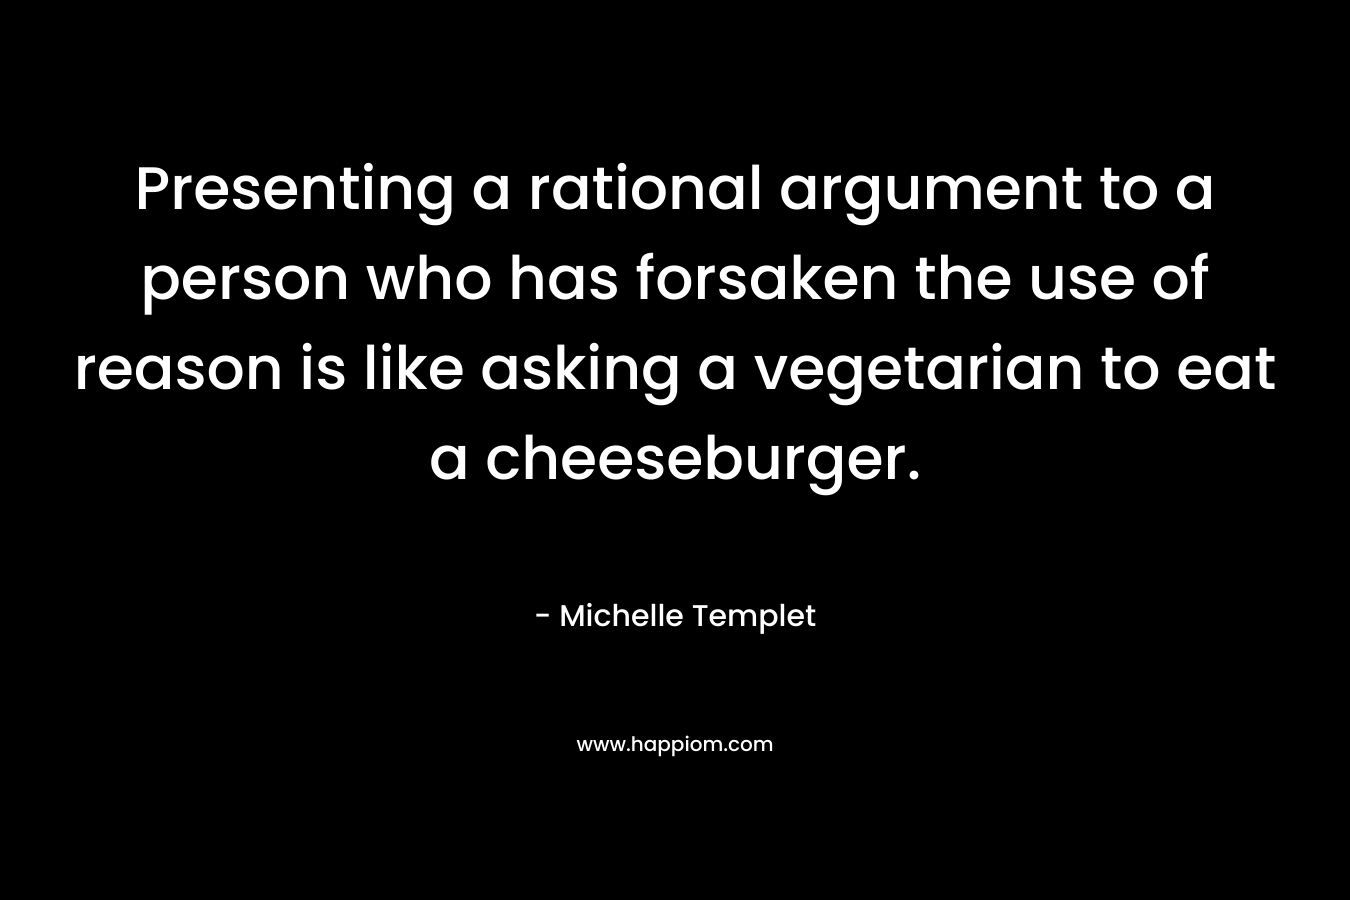 Presenting a rational argument to a person who has forsaken the use of reason is like asking a vegetarian to eat a cheeseburger. – Michelle Templet